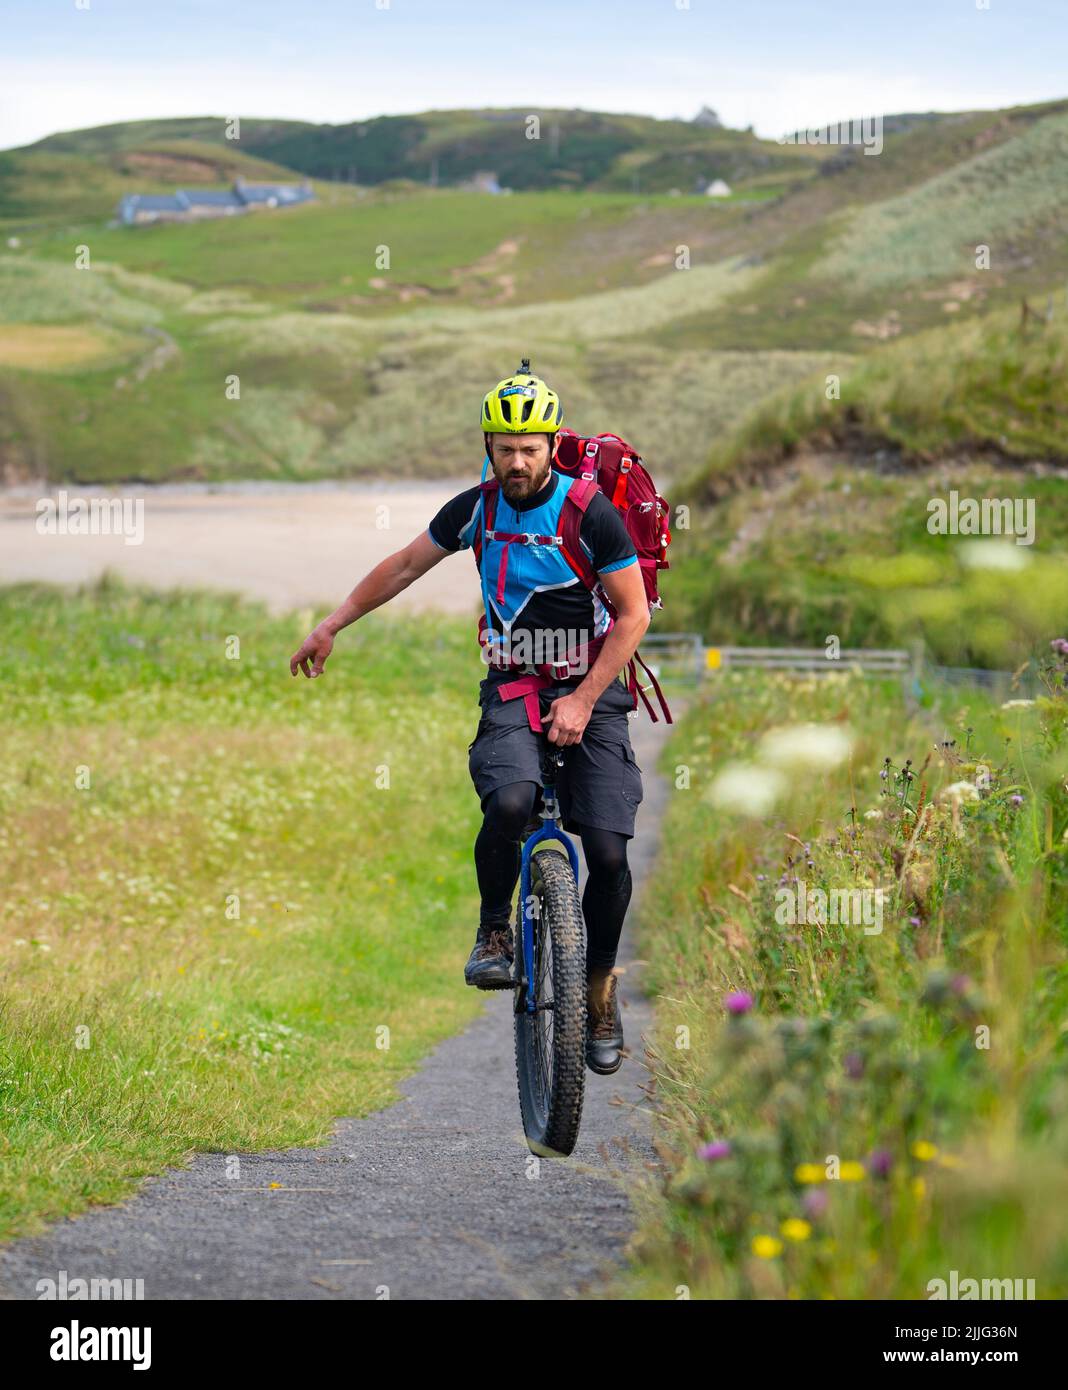 Bettyhill, Scotland, UK. 26 July 2022. Luke Evison riding his unicycle at Bettyhill in the Scottish highlands during his Scotland on One Wheel charity cycle odyssey. Luke ,39, from Bristol is riding solo and unsupported for approximately 225 miles across the Scottish Highlands to raise money for the charities Parkinson’s UK and Mind UK. Luke’s brother was diagnosed with Parkinson’s 6 years ago. Luke finishes his trip at Thurso. Donations can be made at the following website. Collectionpot.com/pot/onewheel.   Iain Masterton/Alamy Live News Stock Photo